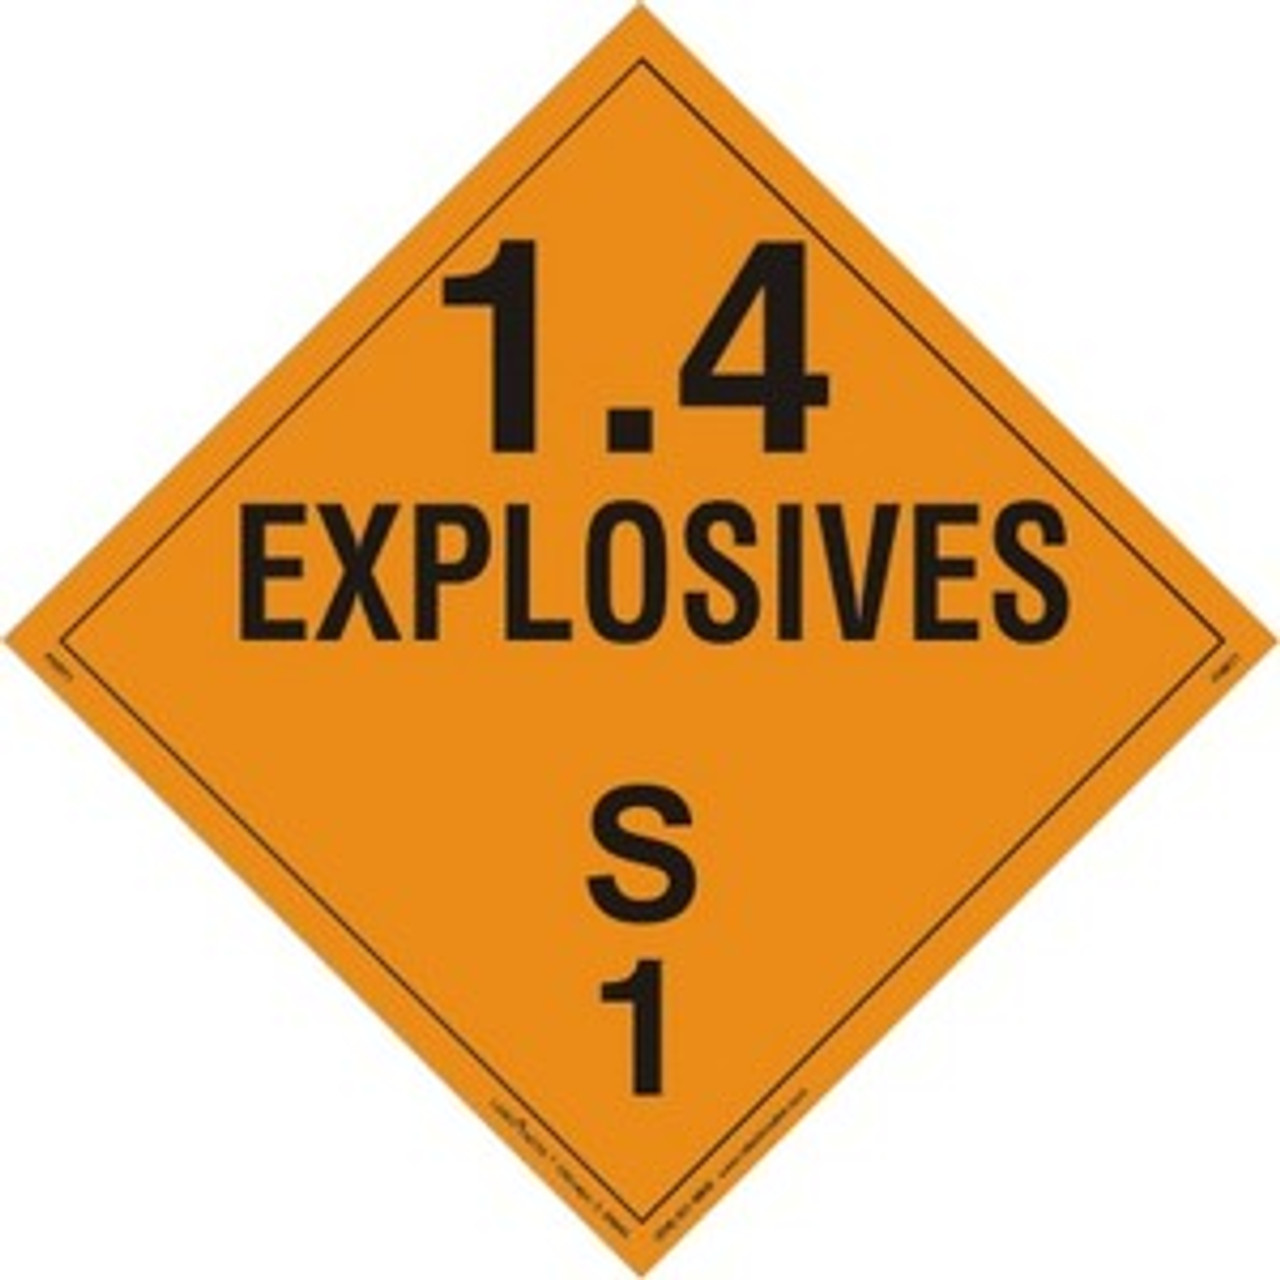 explosives-1-4s-magnetic-placard